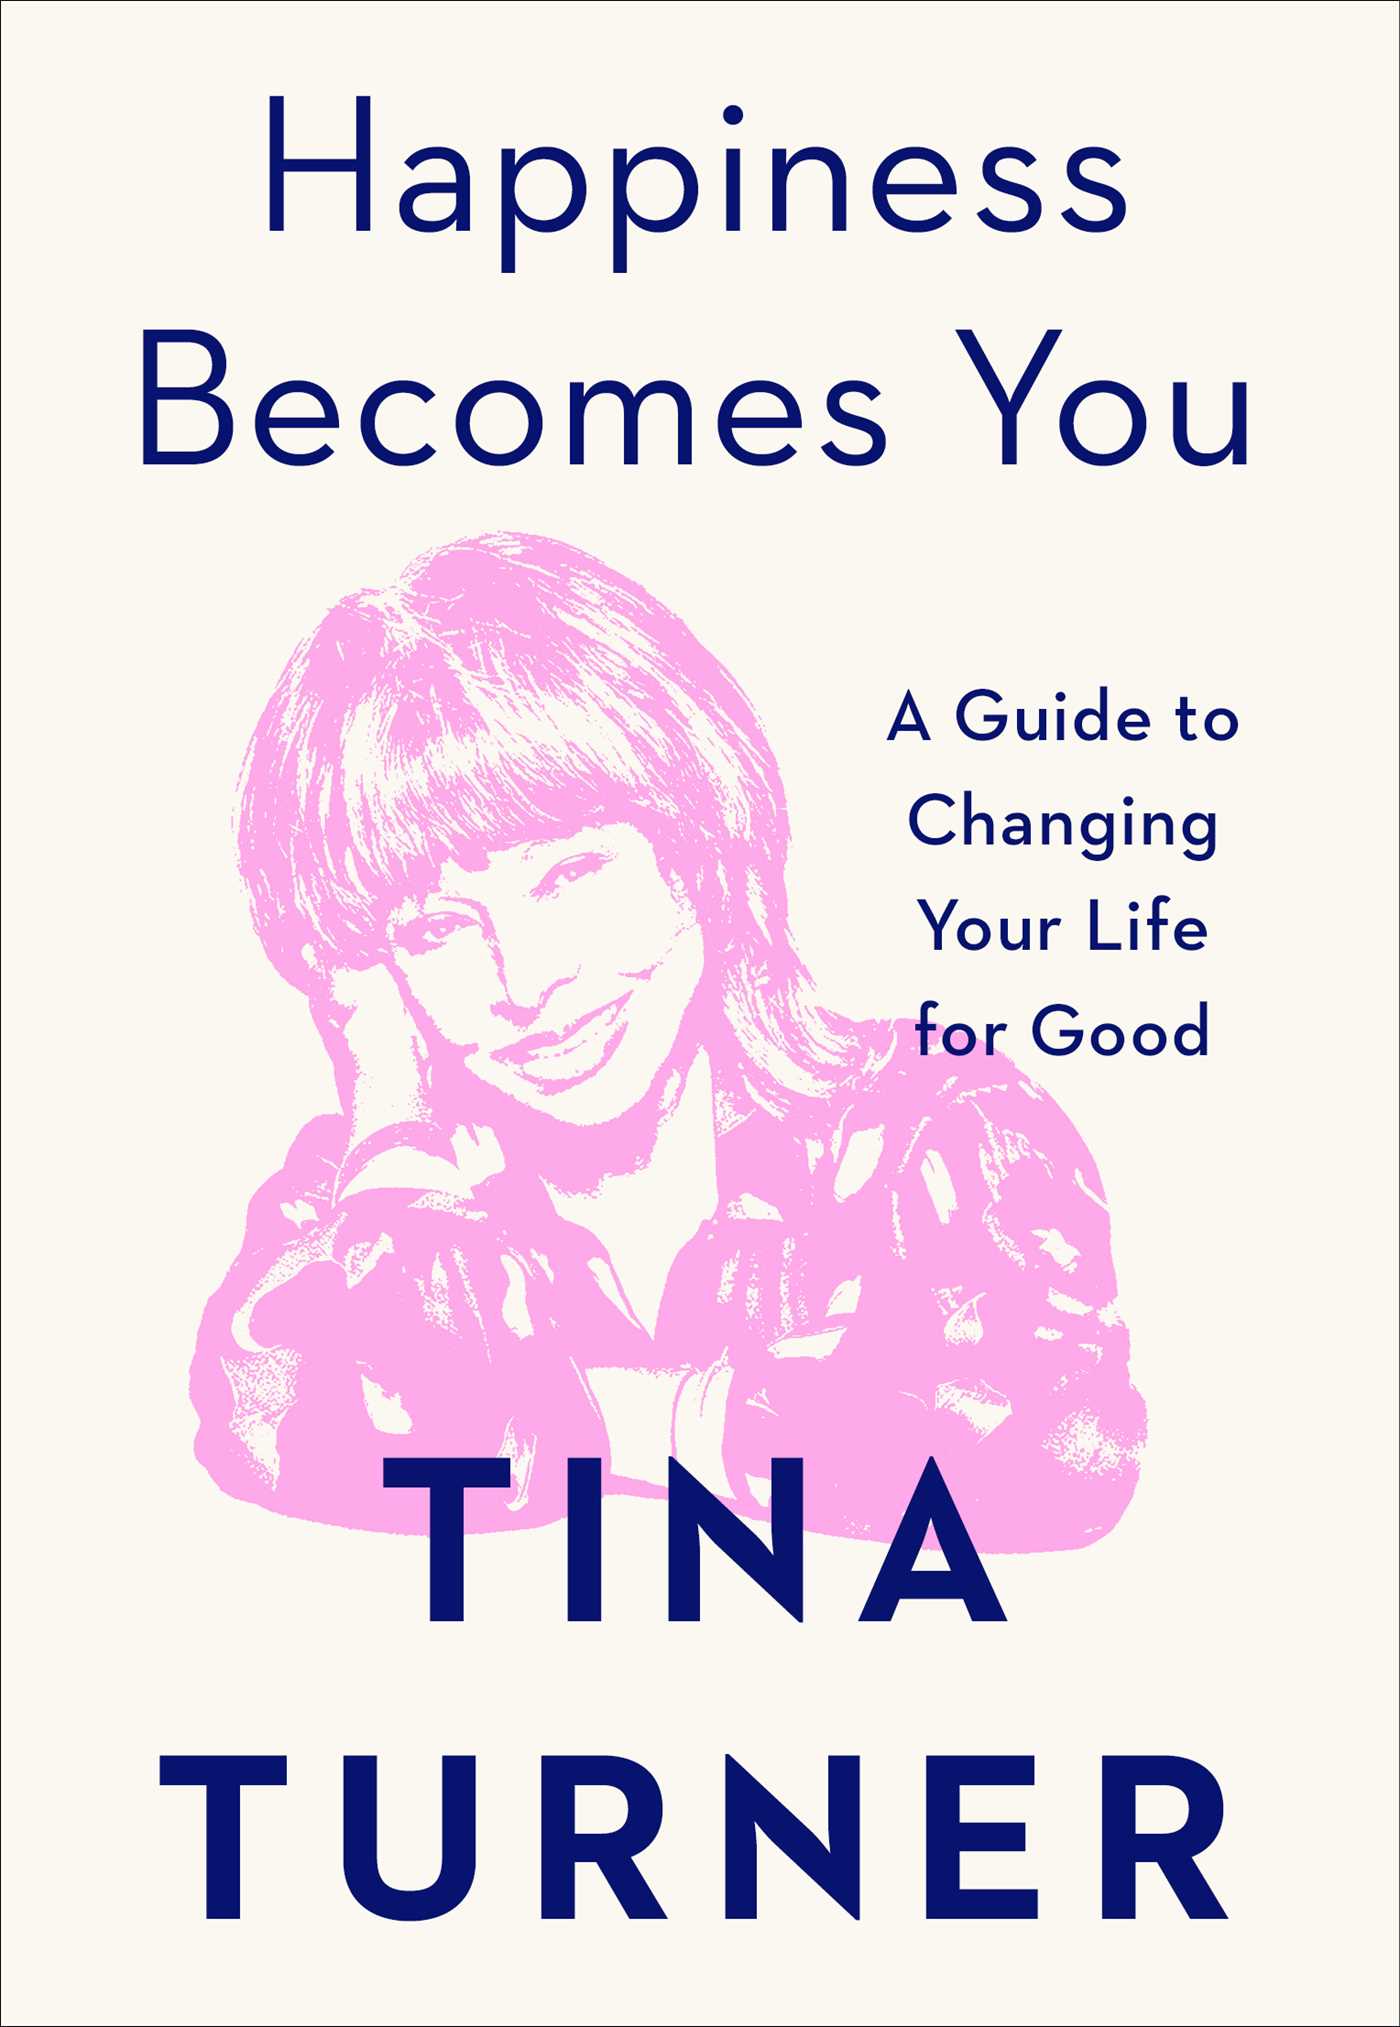 TINA TURNER - HAPPINESS BECOMES YOU: A GUIDE TO CHANGING YOUR LIFE FOR GOOD - HARDCOVER - BOOK